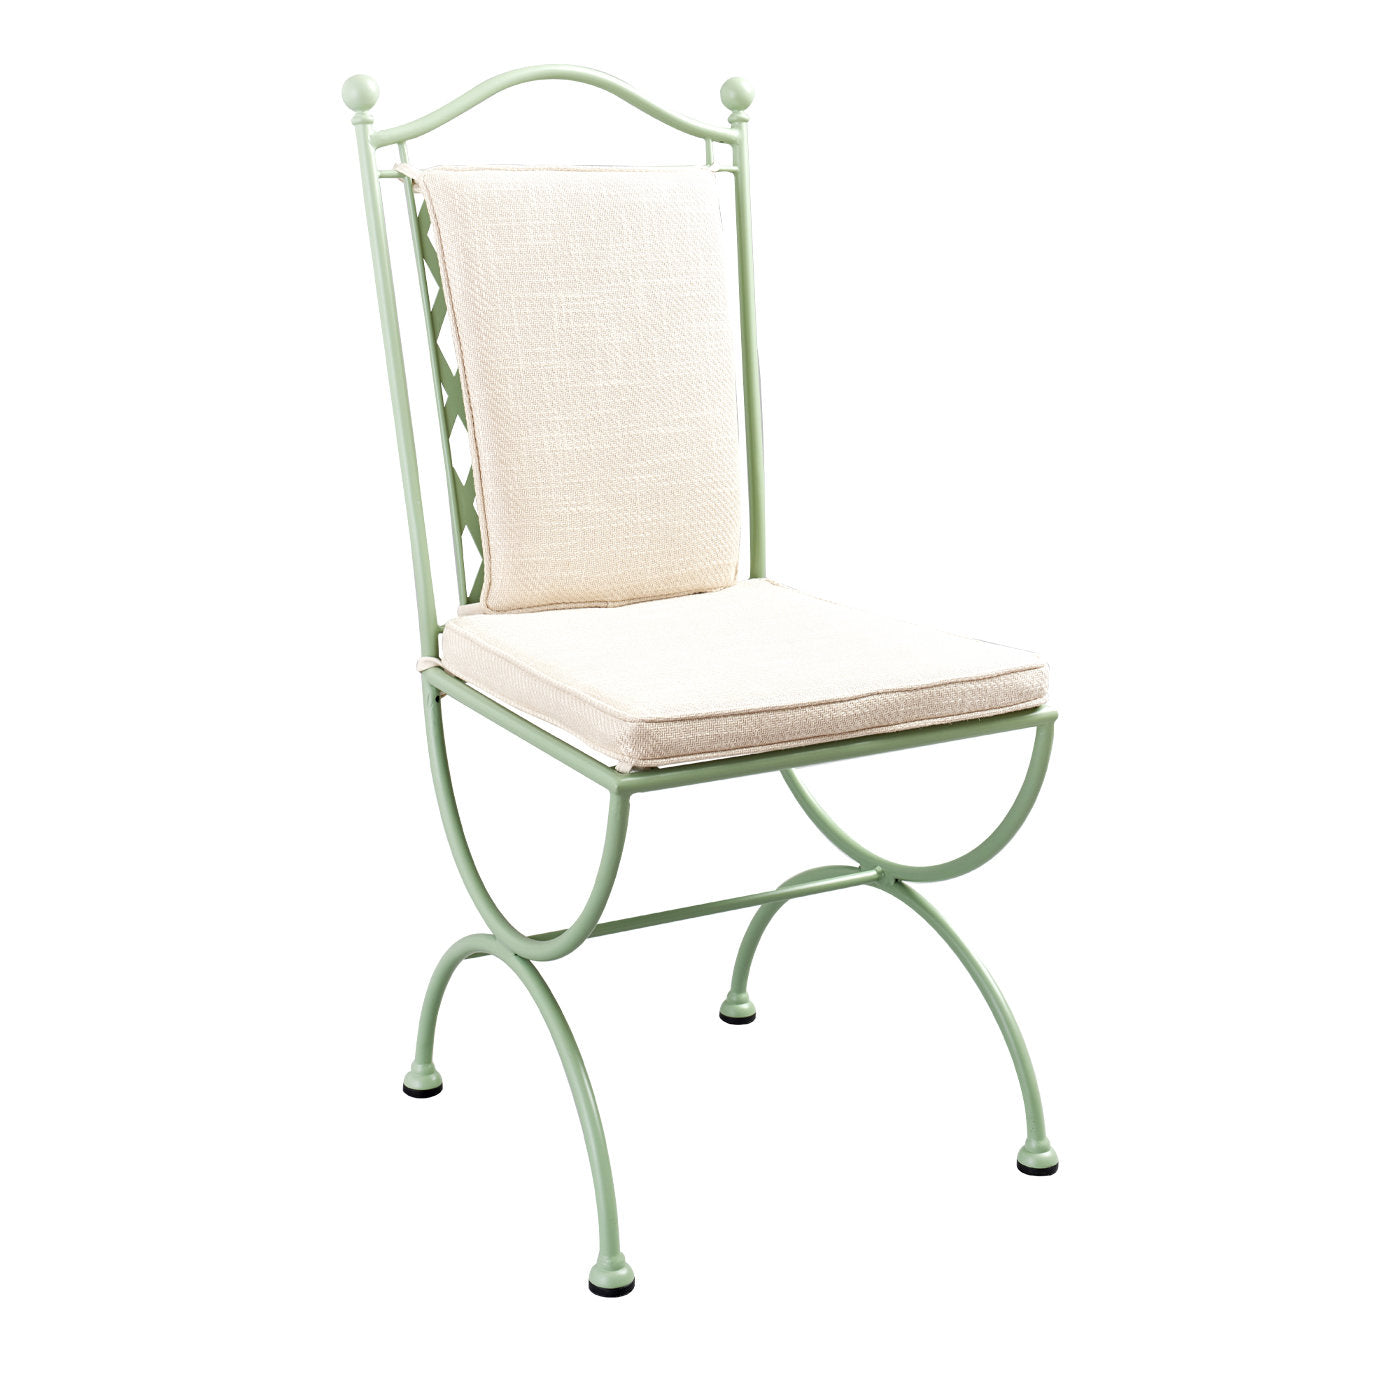 Rombi Outdoor Green Wrought Chair in Stainless Steel - Main view